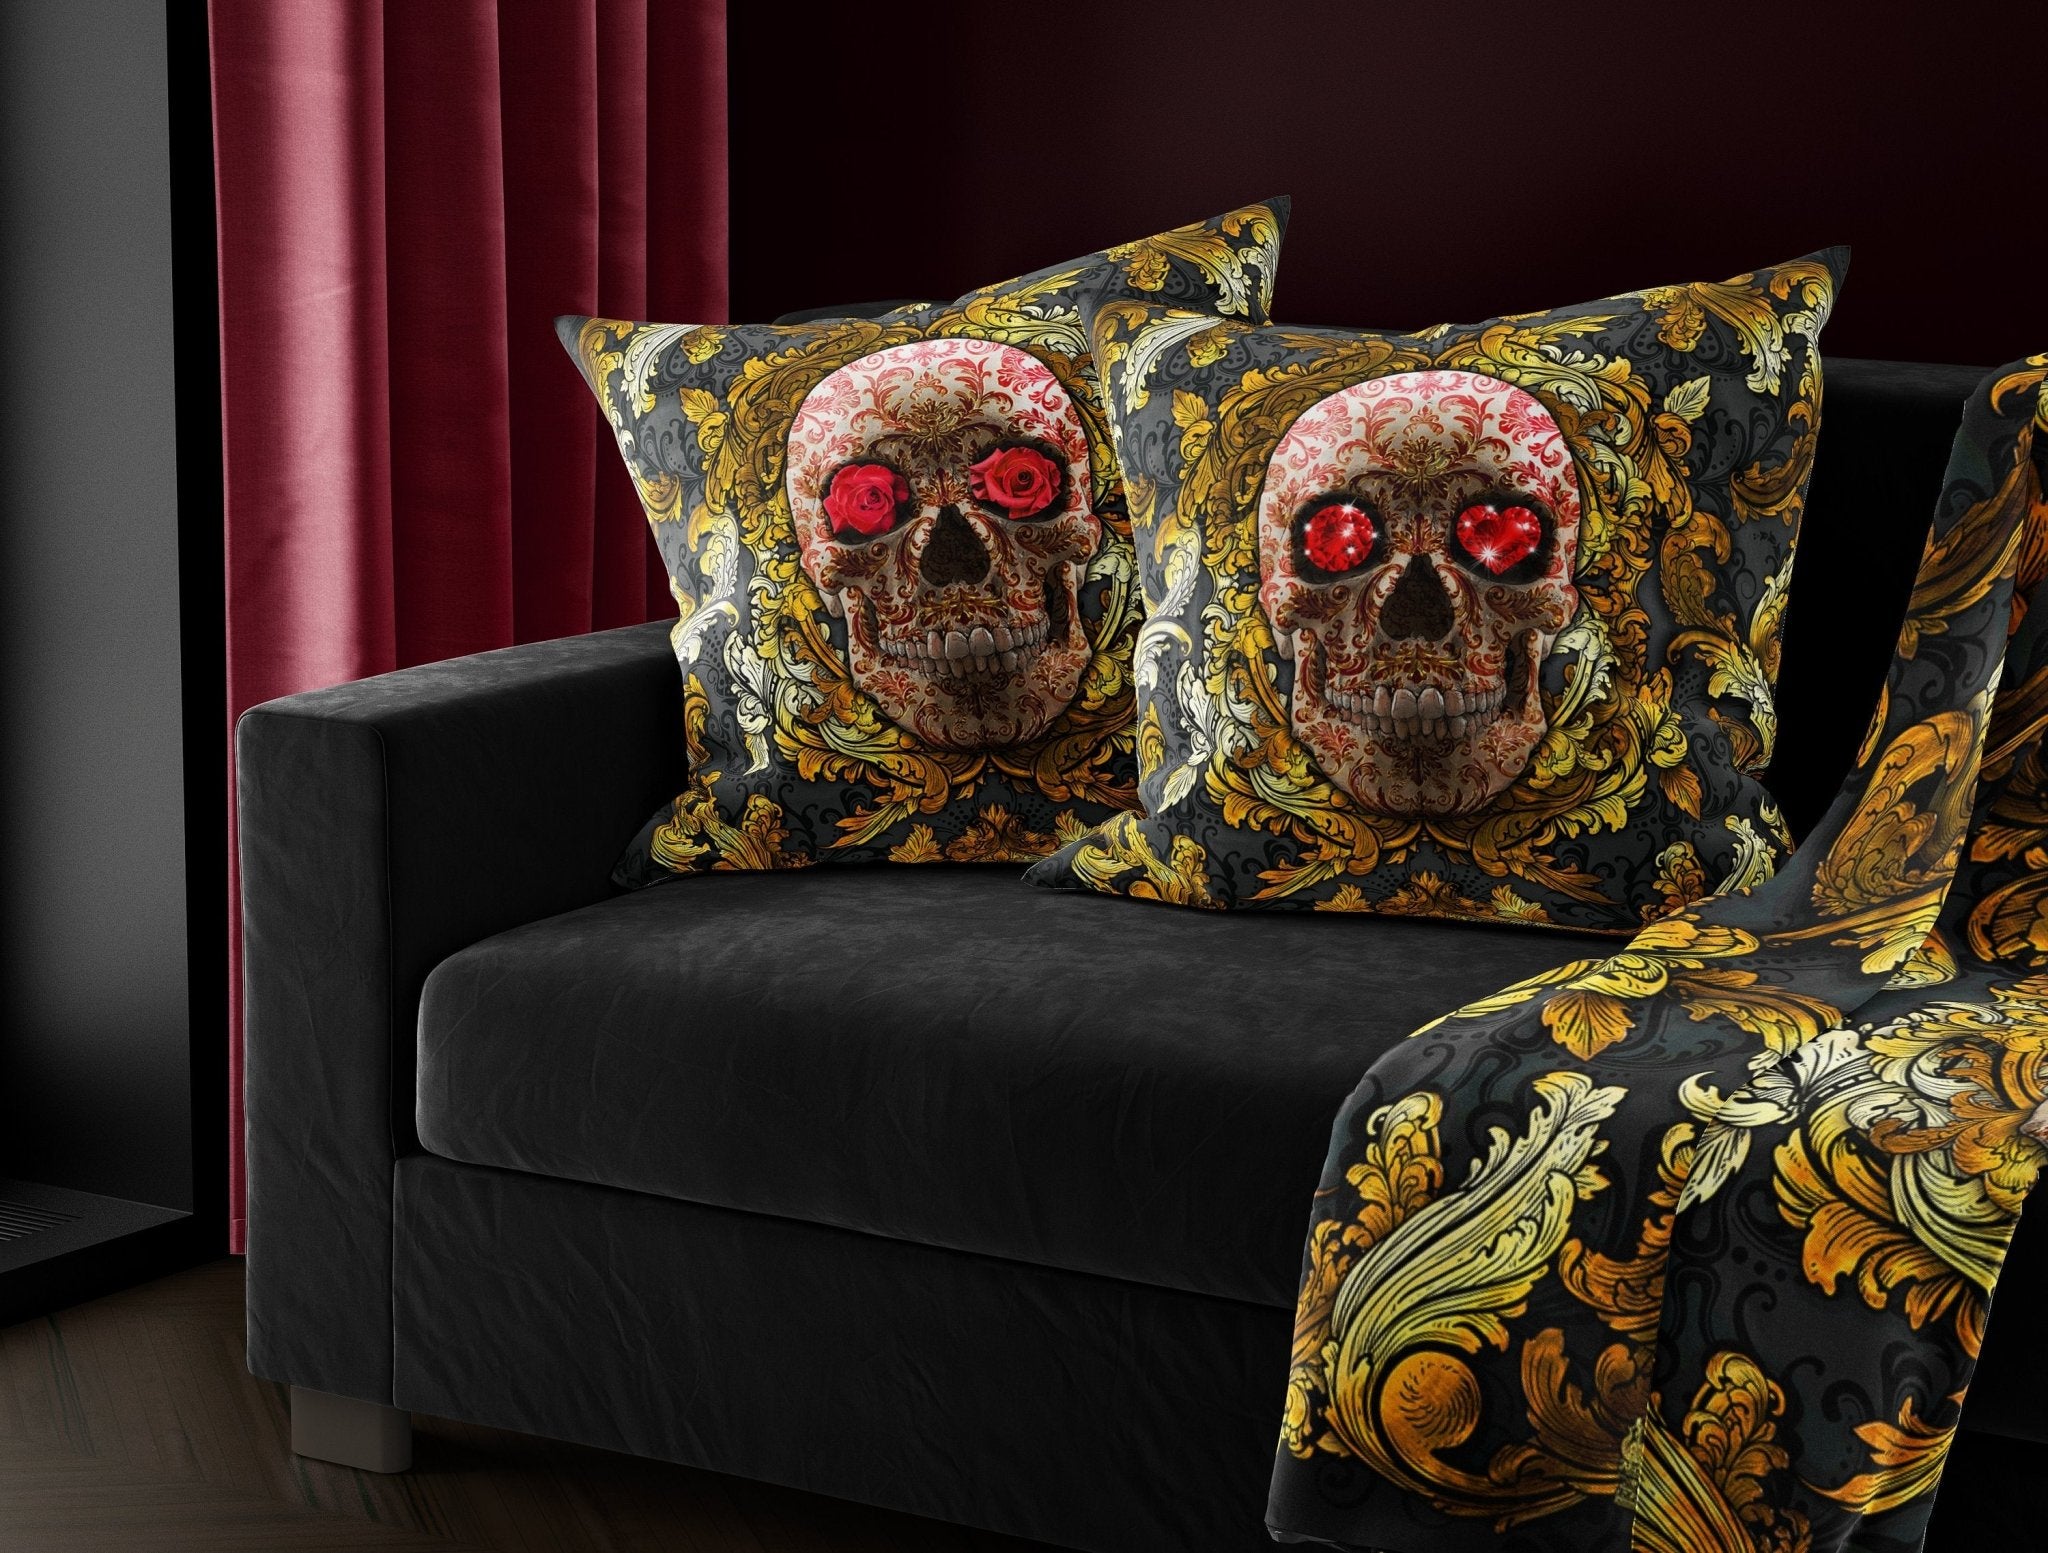 Skull Throw Pillow, Decorative Accent Cushion, Baroque, Vintage Decor, Macabre Art, Alternative Home, Funky and Eclectic Decor - Gold & Red Roses - Abysm Internal